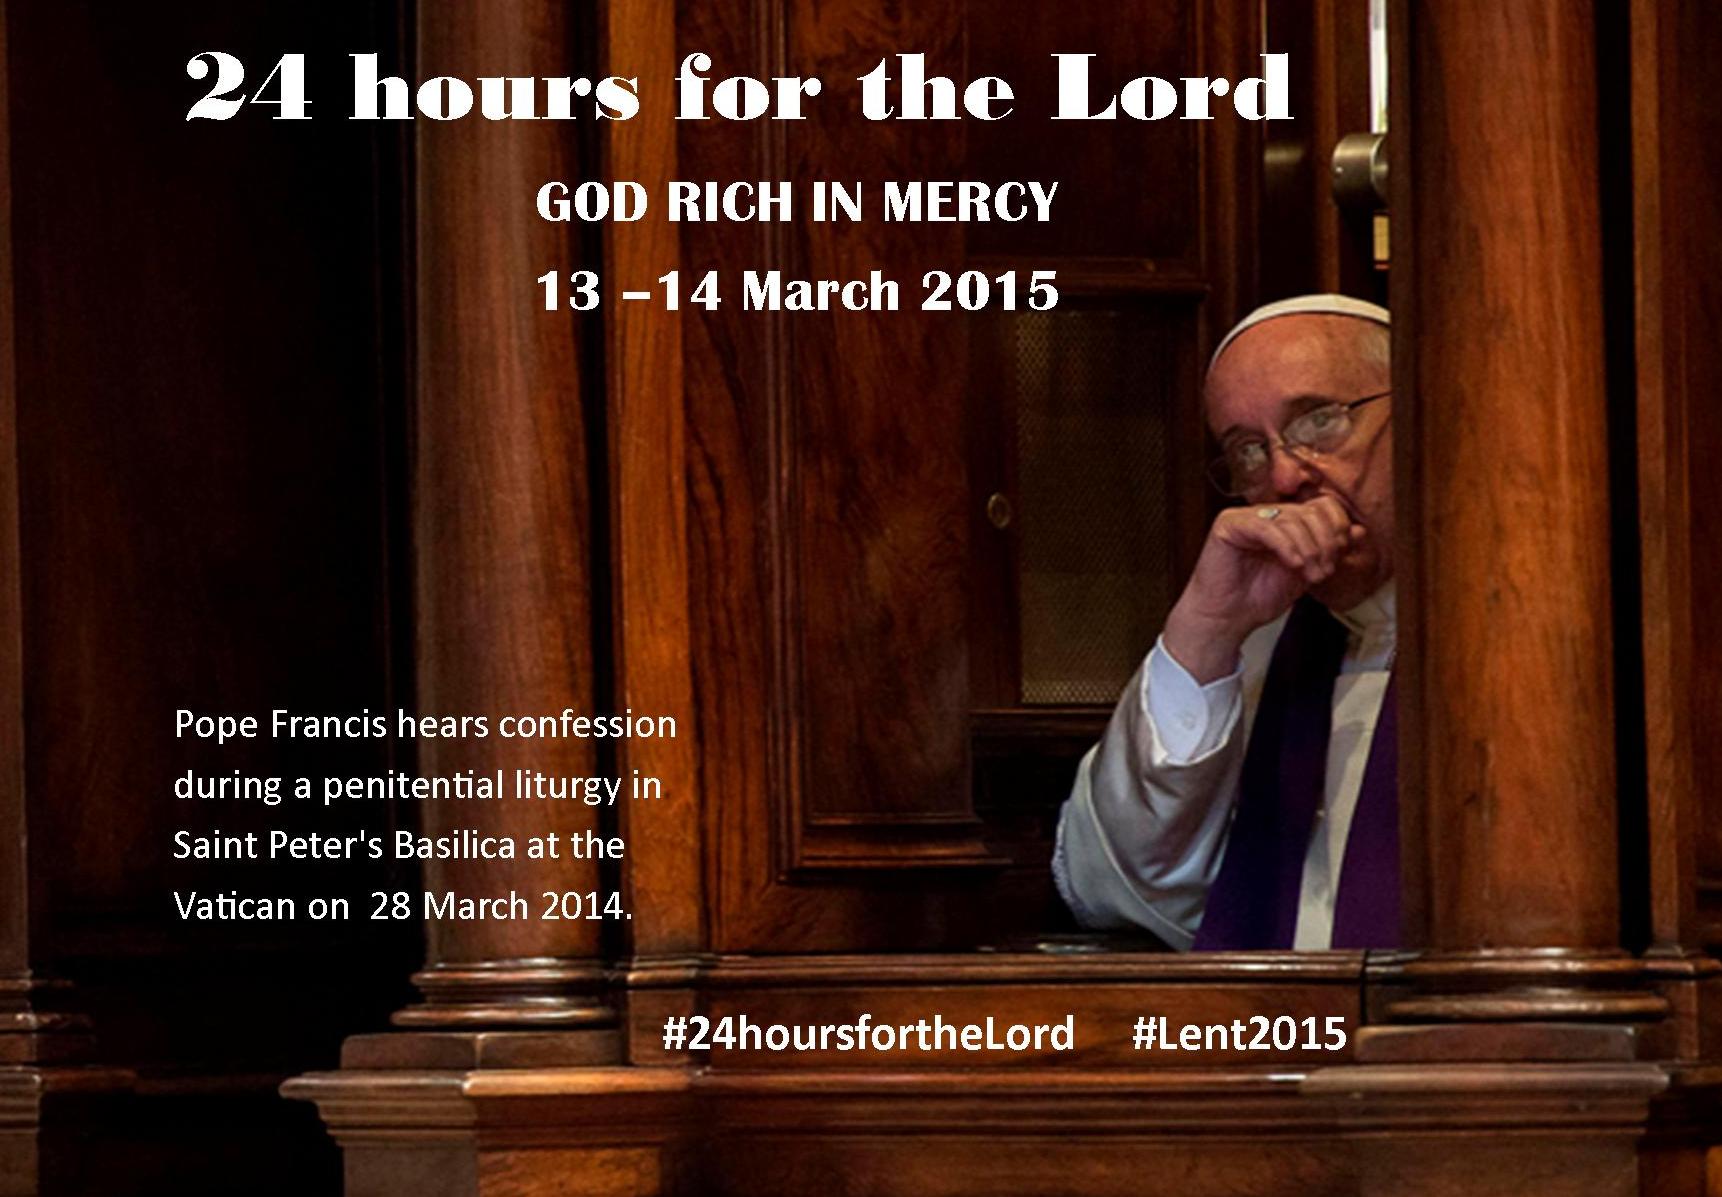 24 hours for the Lord 2015 facebook image